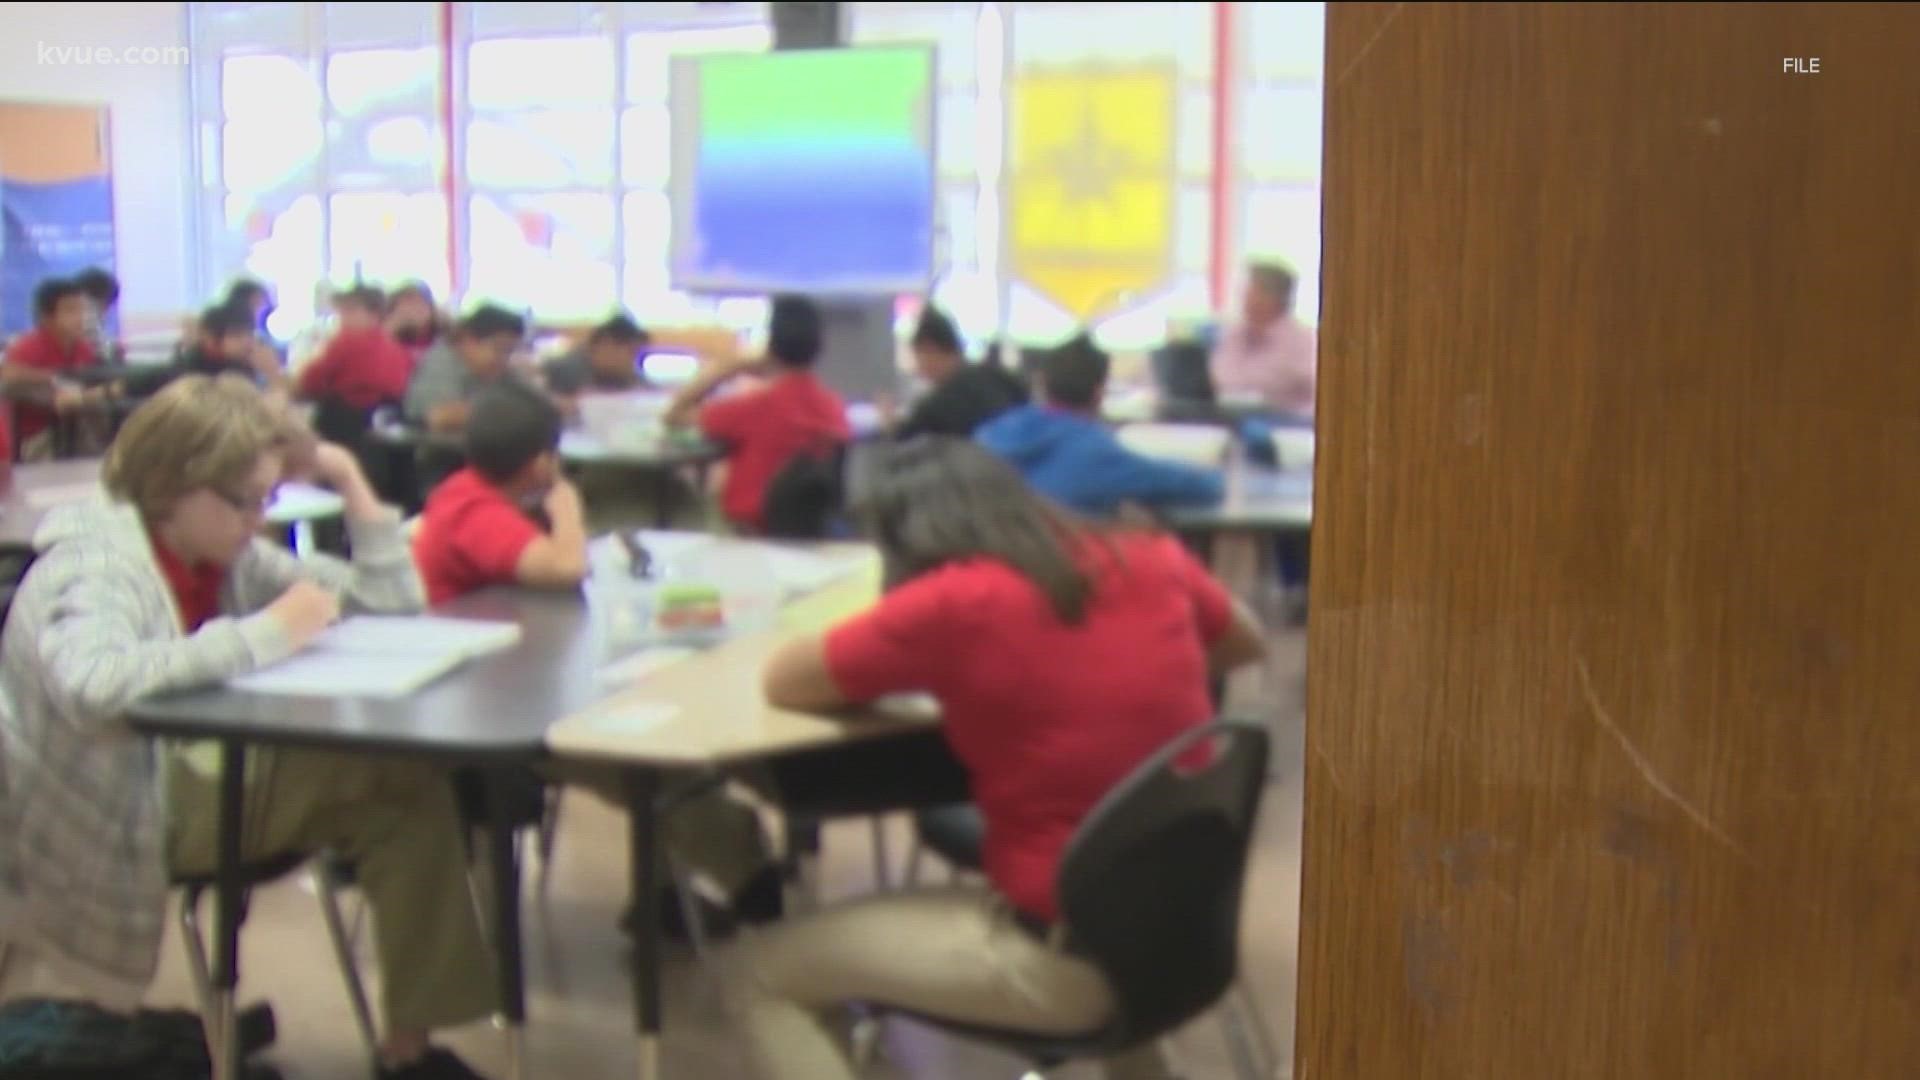 Funding will be made available to school systems in Texas that have experienced attendance declines because of the pandemic.